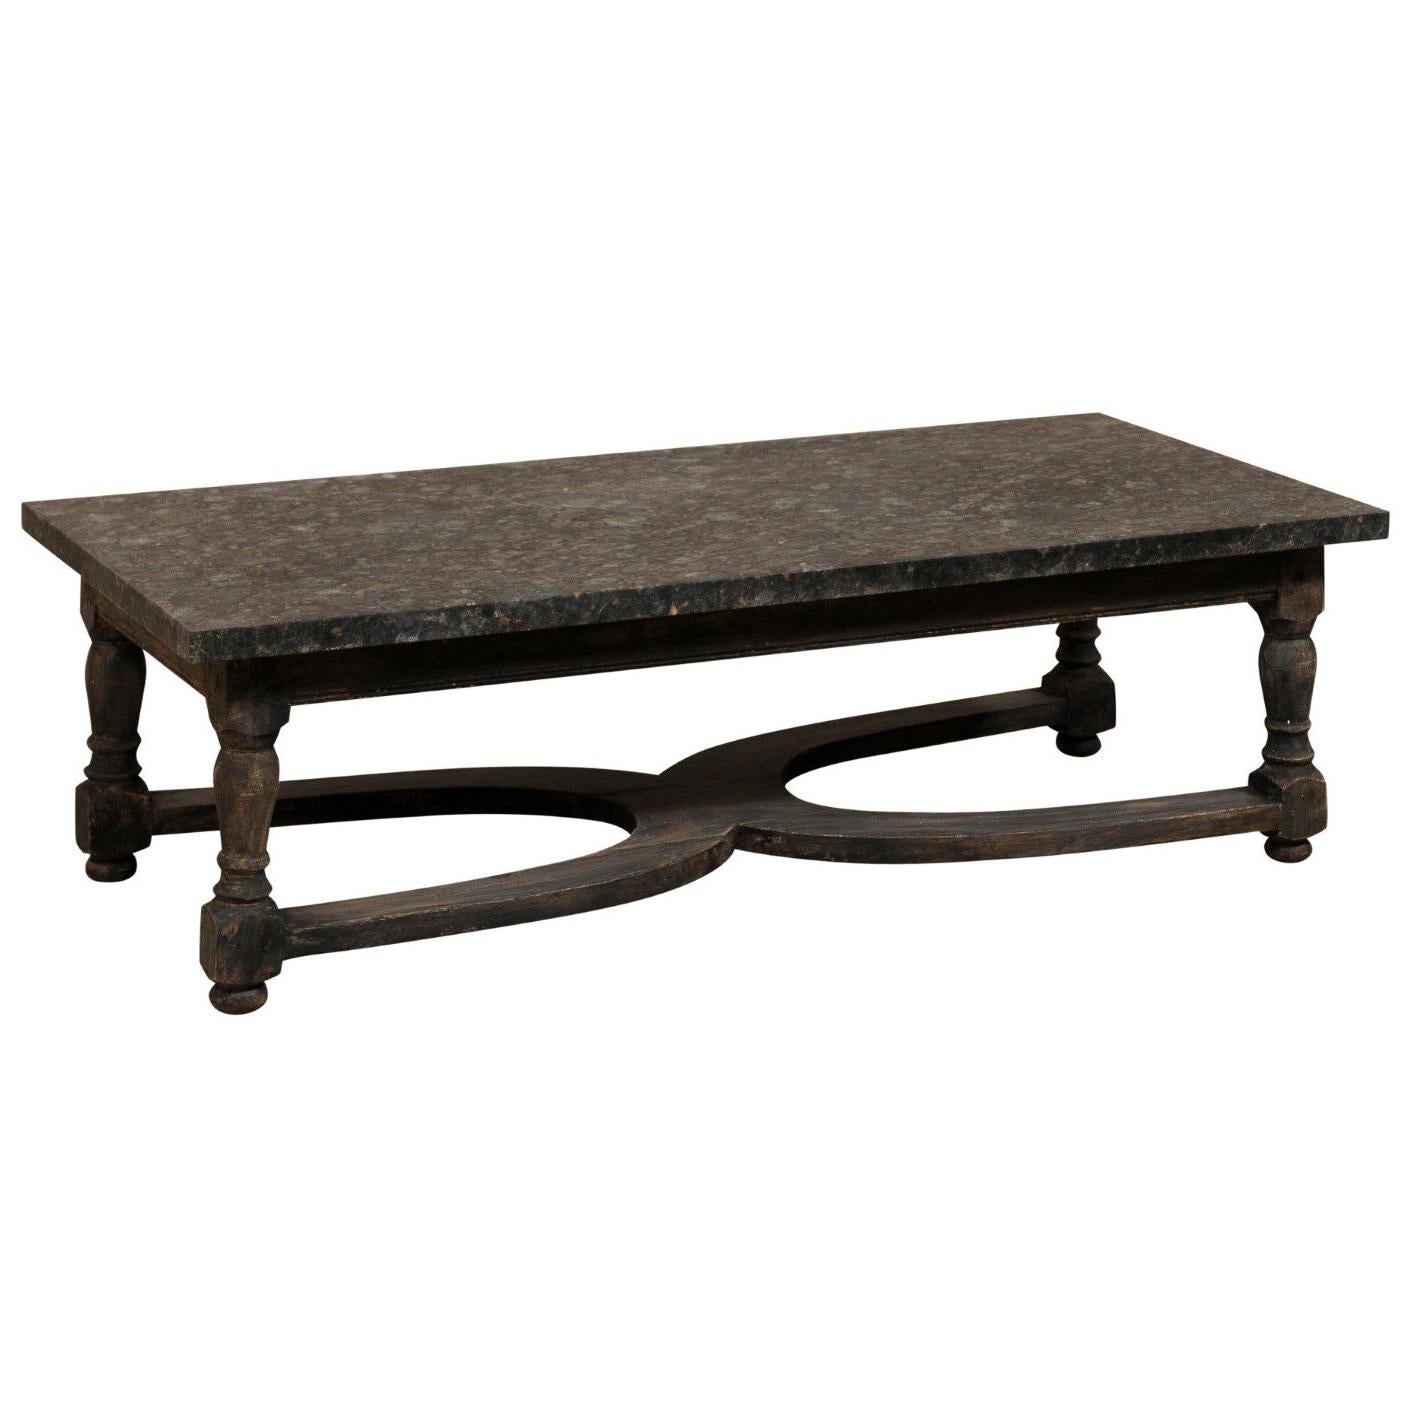 Swedish 19th Century Painted Wood Coffee Table with Granite Top